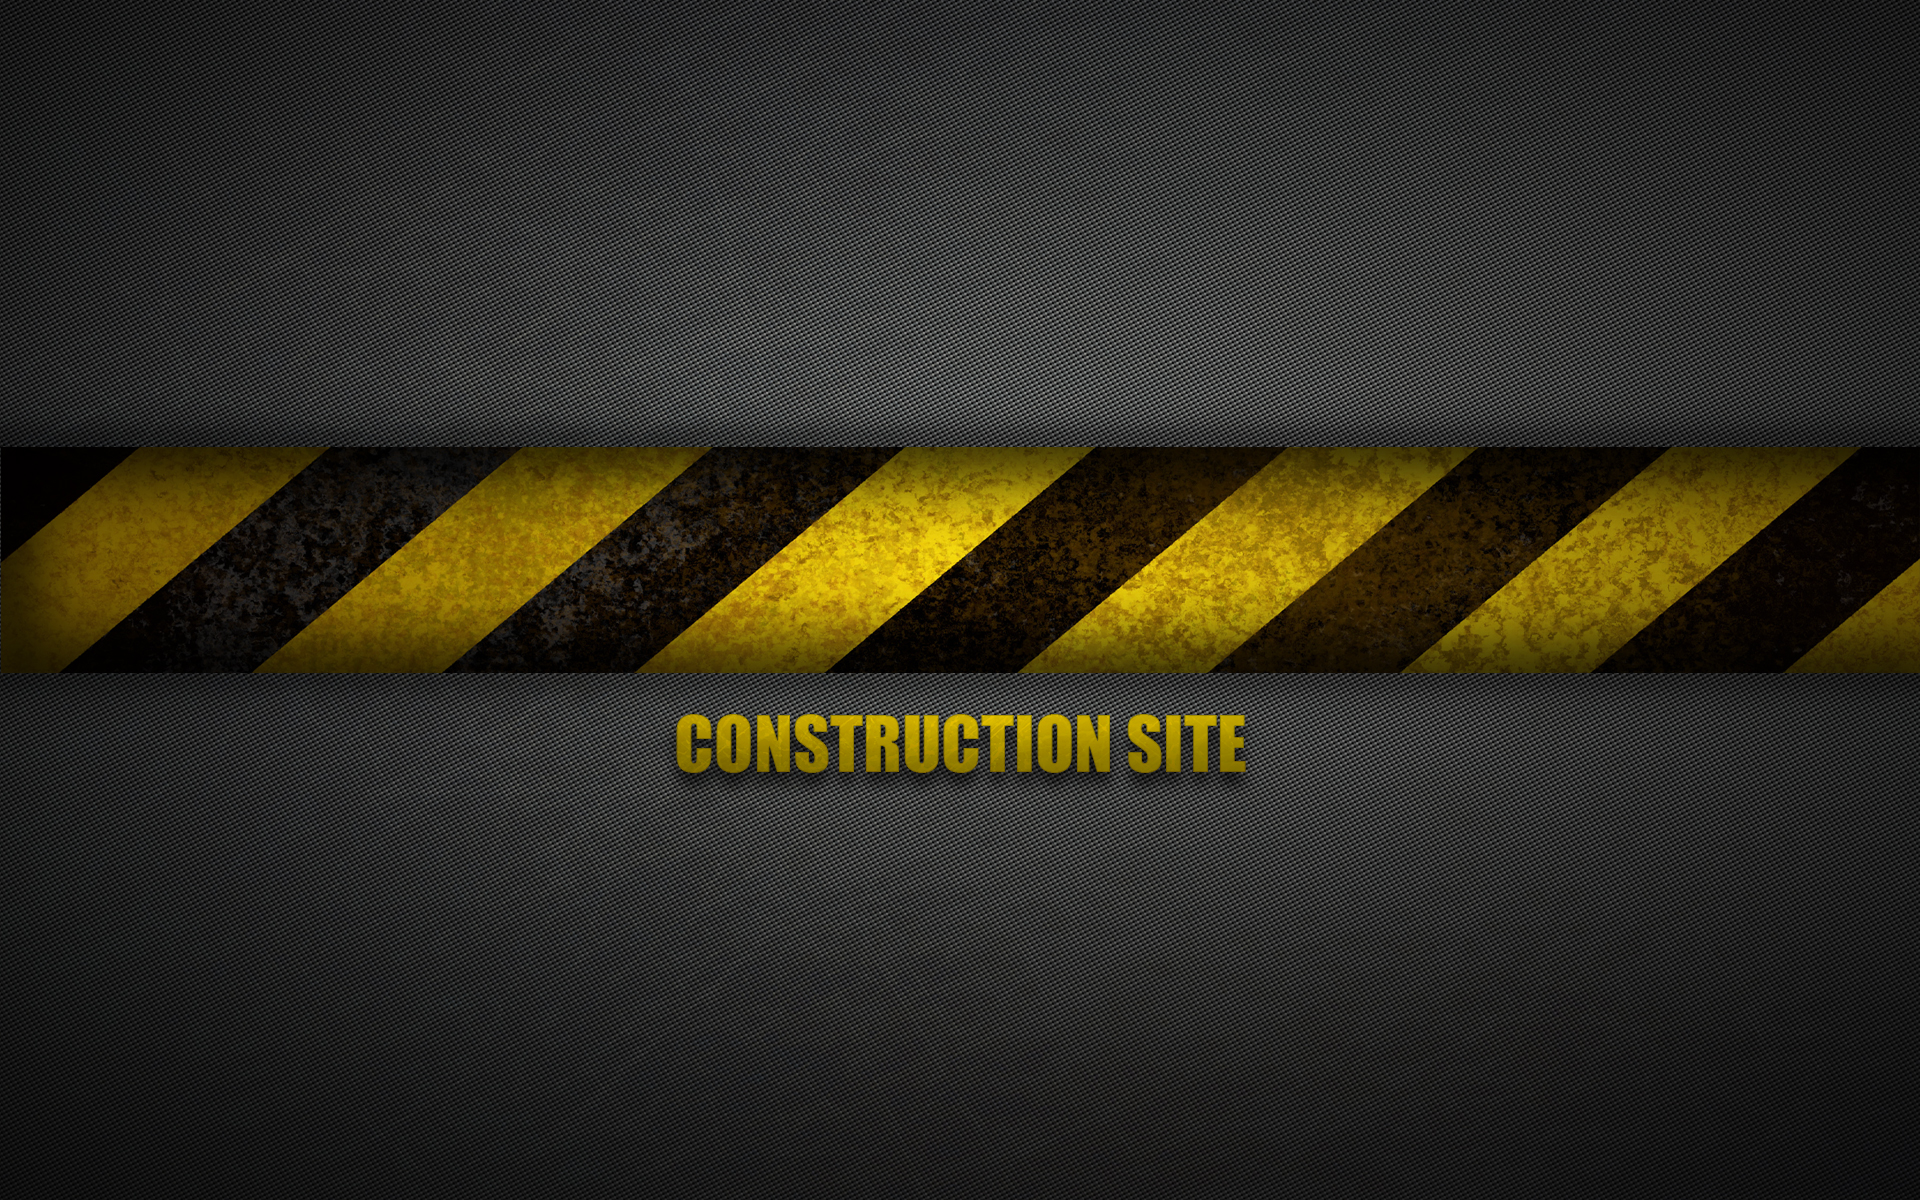 Free Construction Wallpaper For Download in High Definition